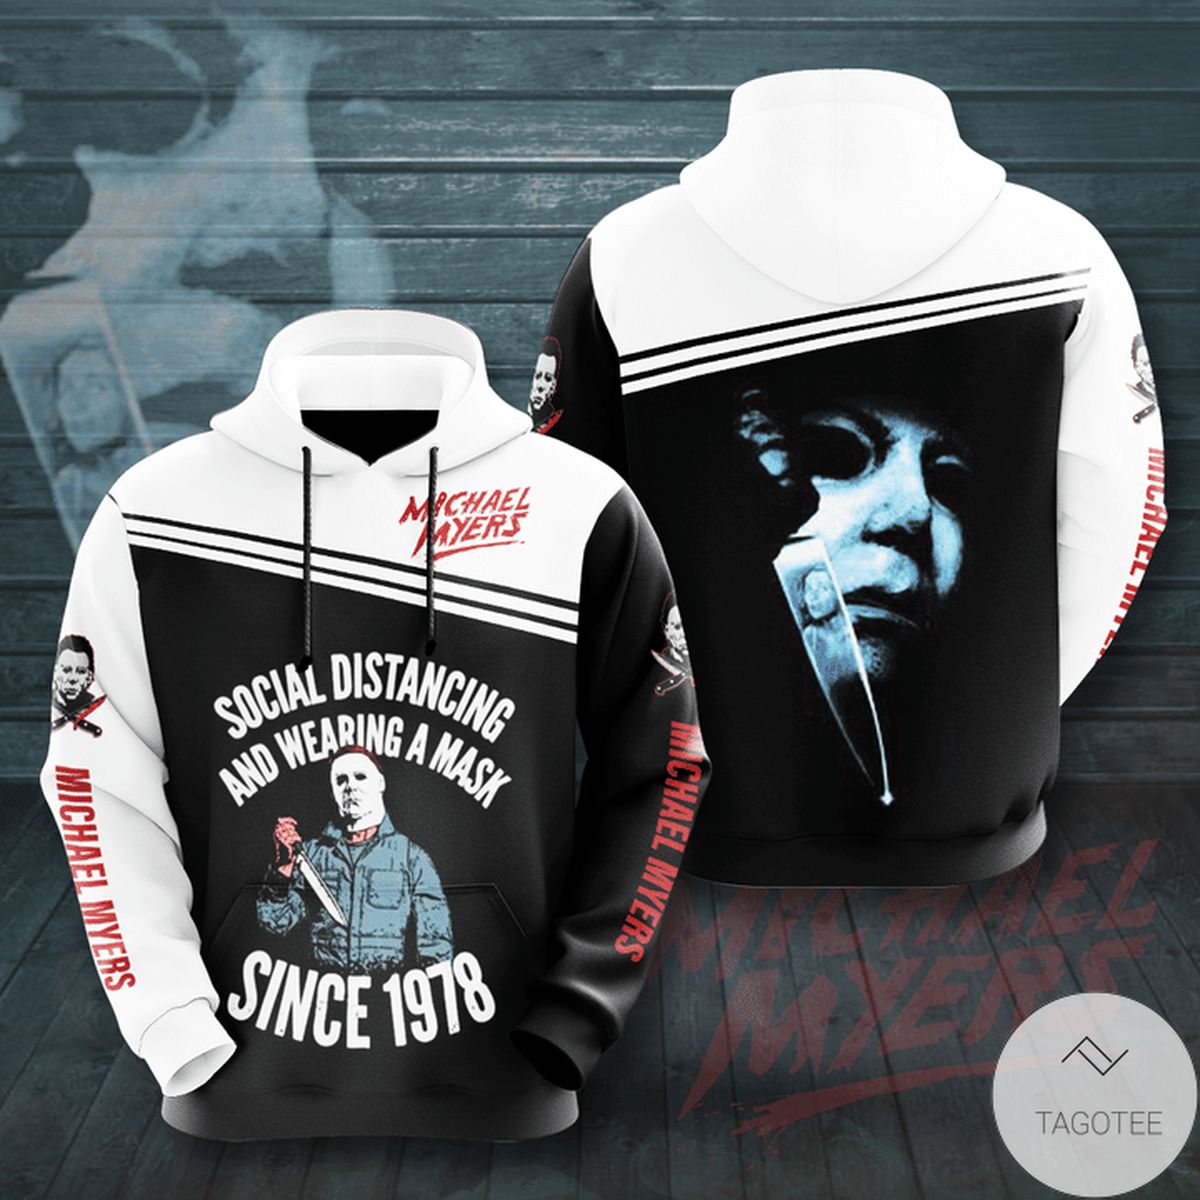 Michael Myers Social Distancing And Wearing Mask Since 1978 Hoodie